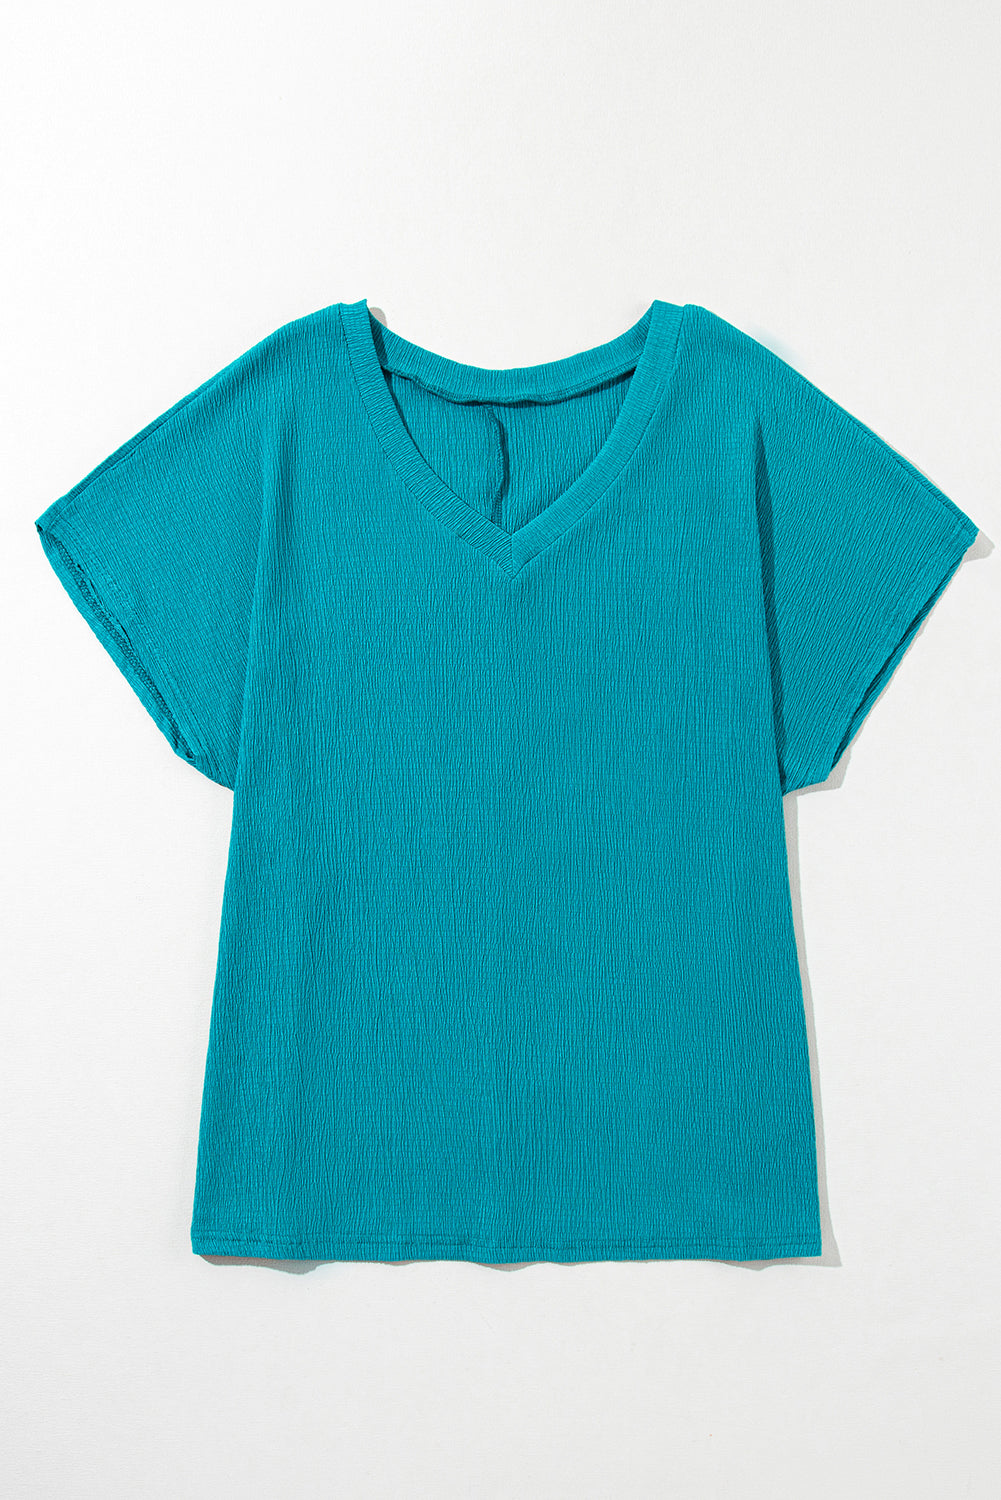 Textured V Neck Bubble Hem Top in Curvy Size ONLY